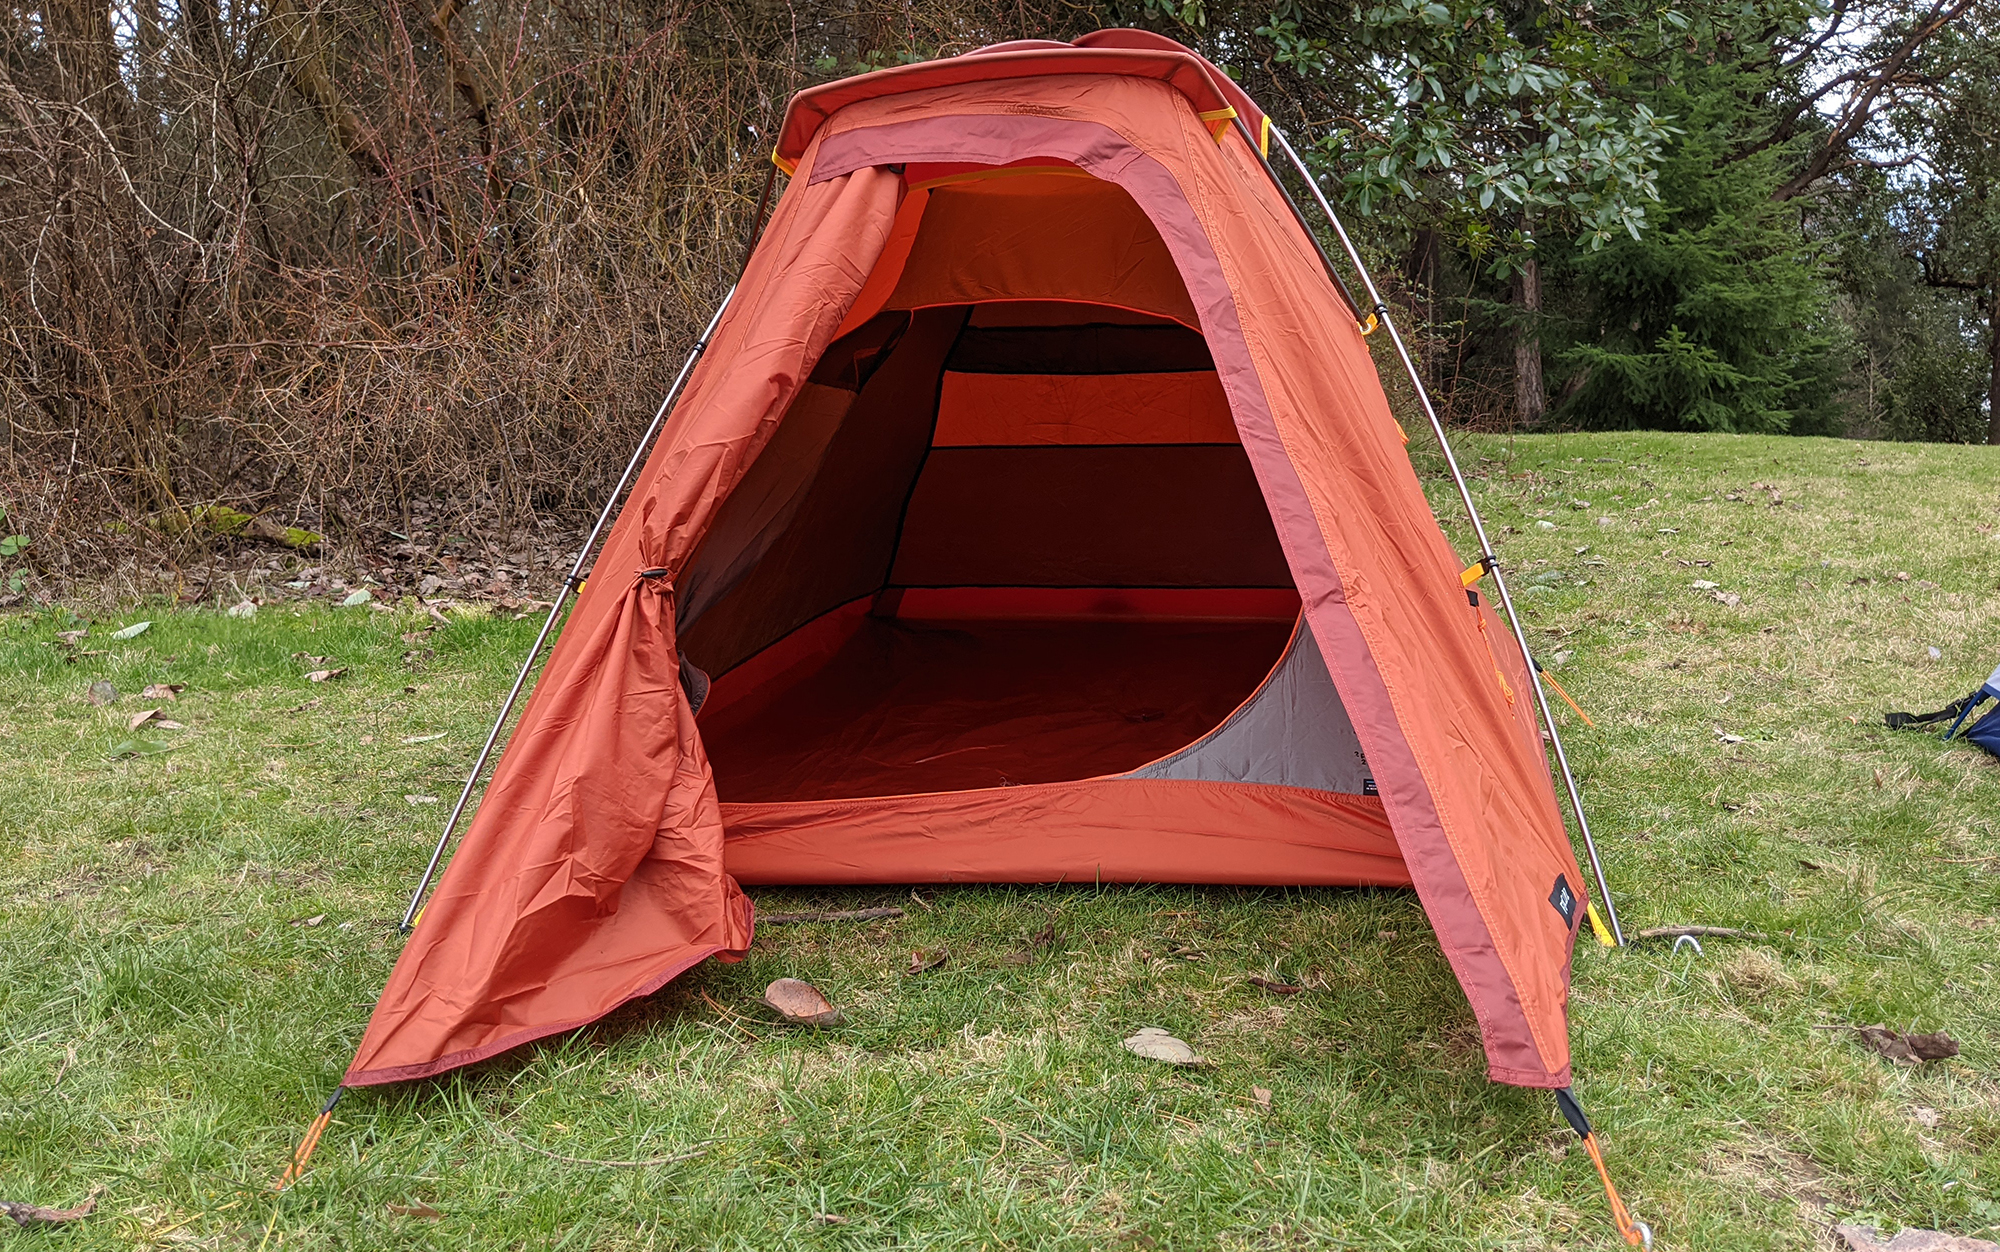 The Decathlon Forclaz also has an unusually large vestibule that you could easily suit up in before heading out into the elements.